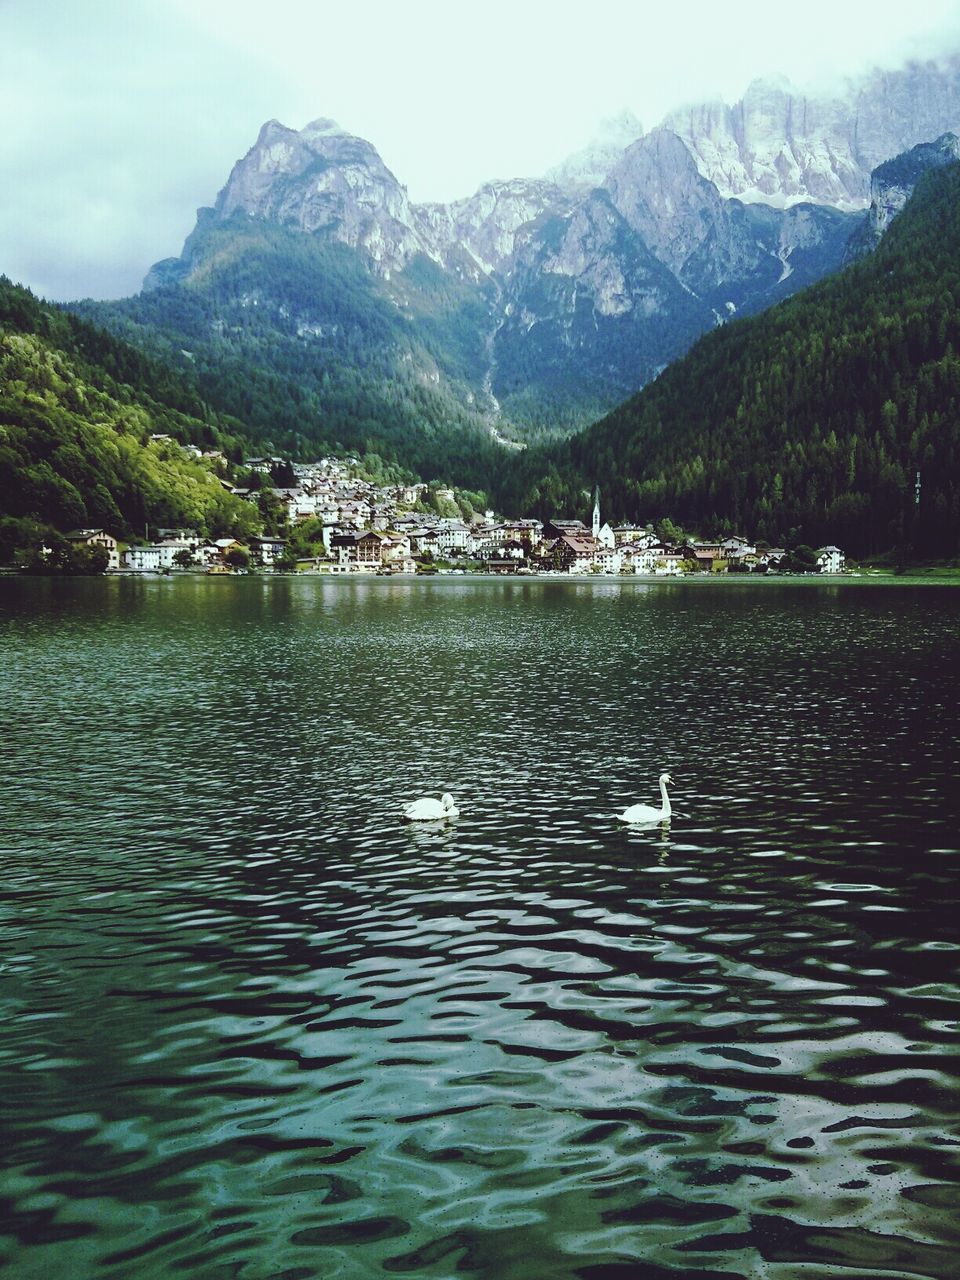 Swans swimming in river against dolomites